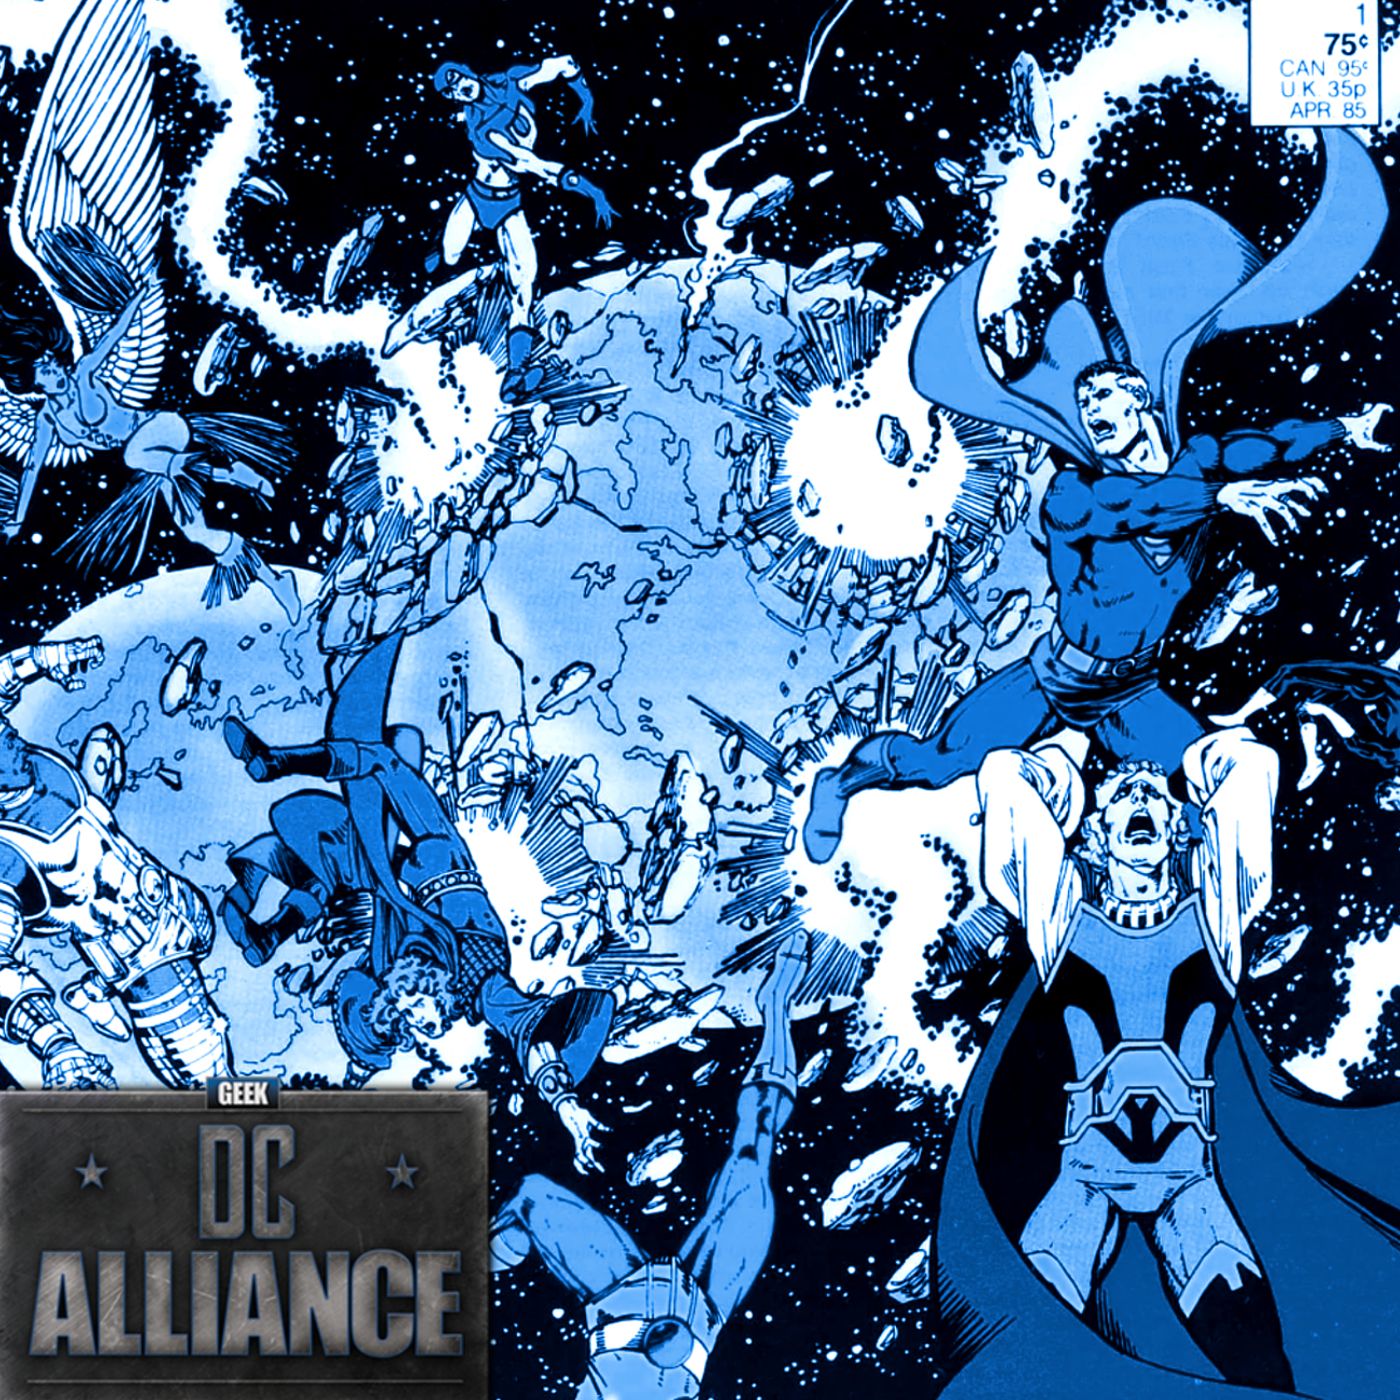 DCEU Crisis on Infinite Earths Film Happening: DC Alliance Ch. 105